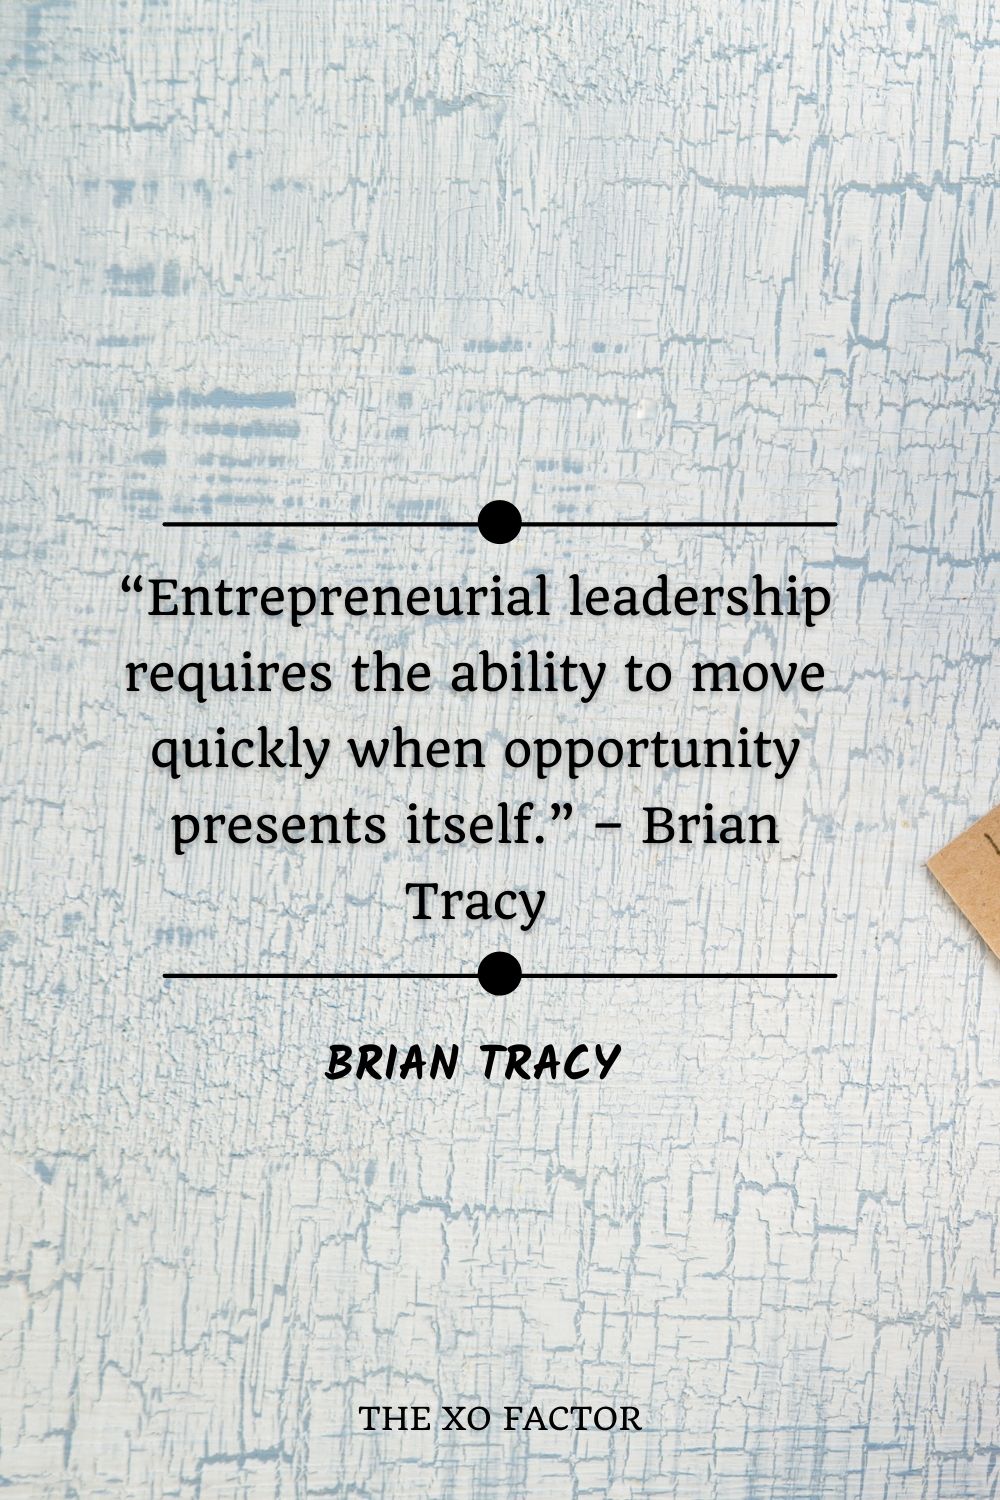 Entrepreneurial leadership requires the ability to move quickly when opportunity presents itself.” – Brian Tracy